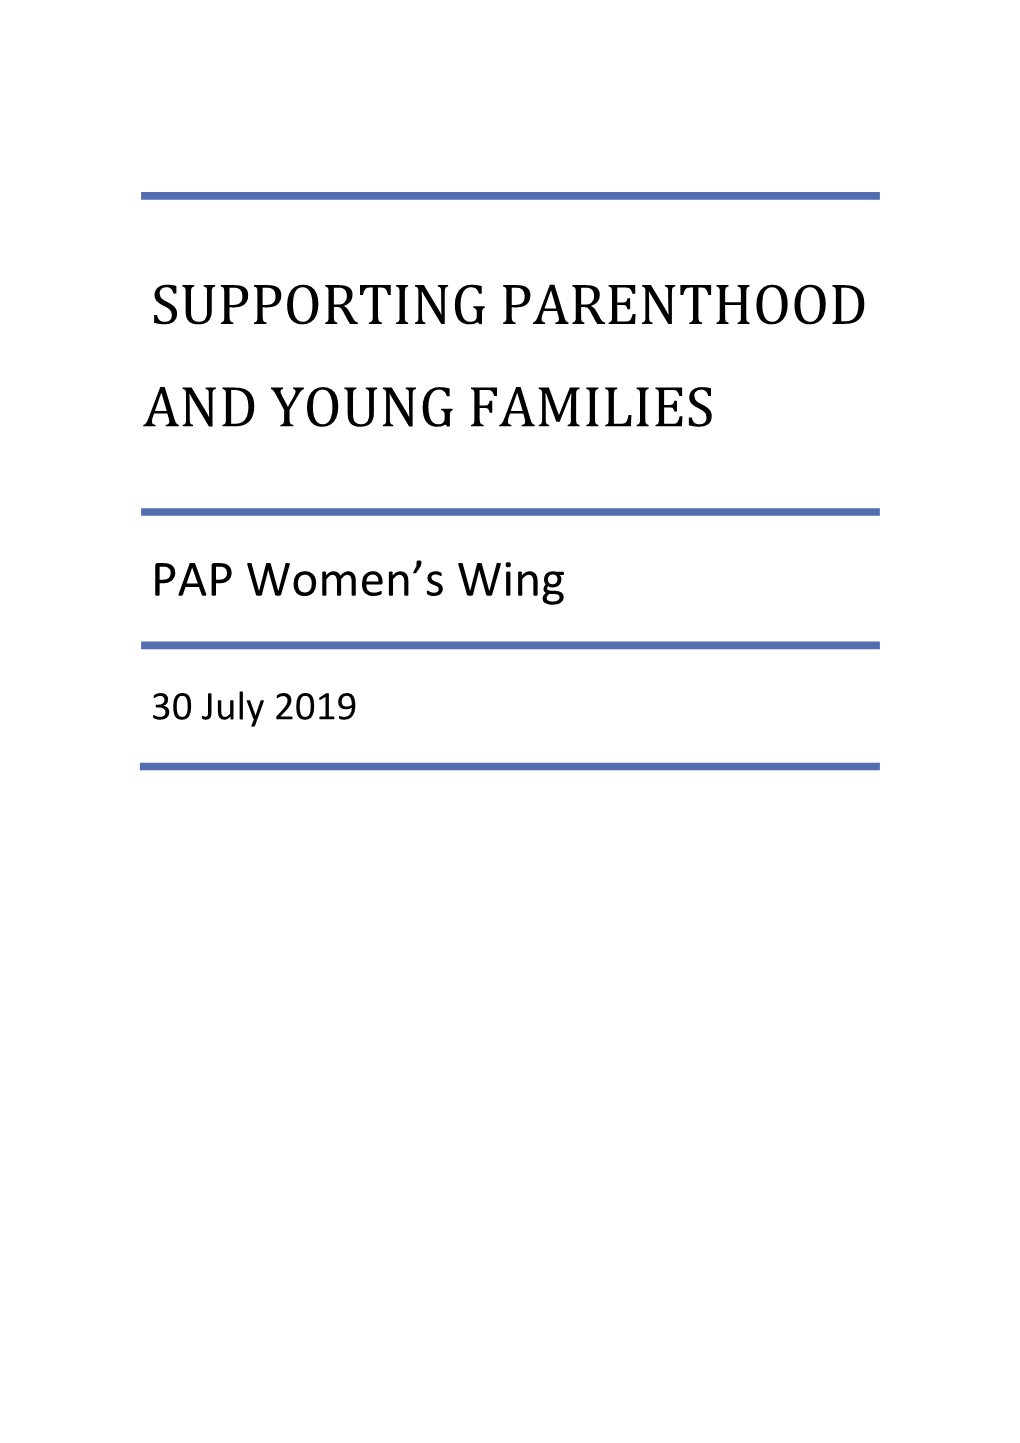 Supporting Parenthood and Young Families